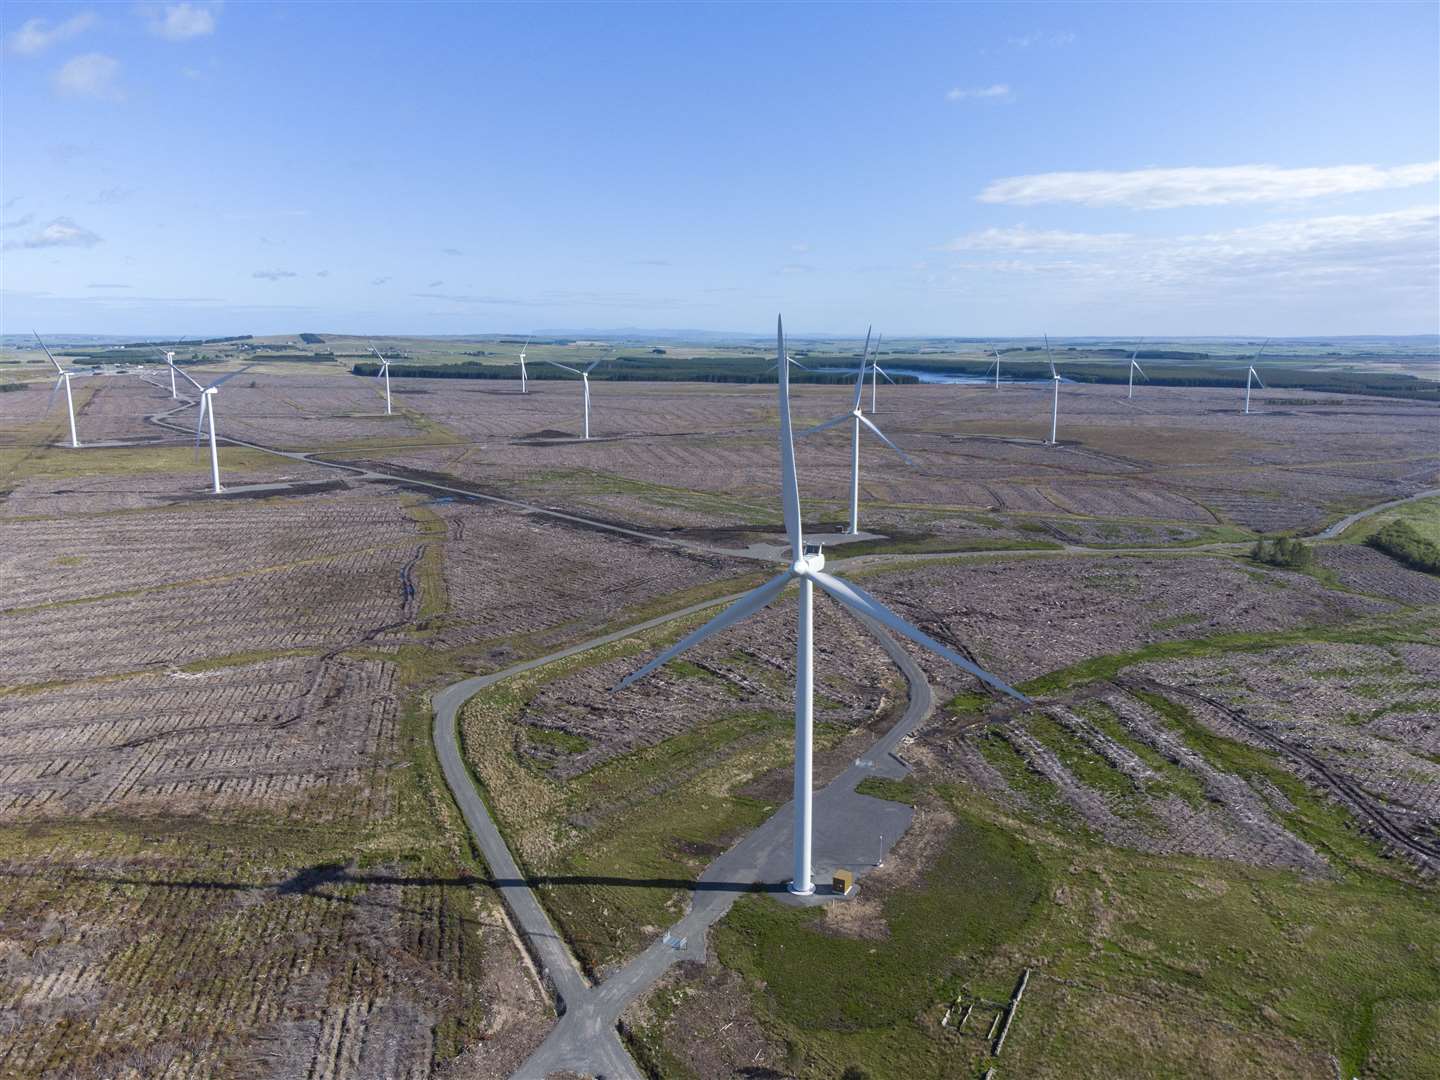 The Halsary wind farm helped fund the £5.3 million package